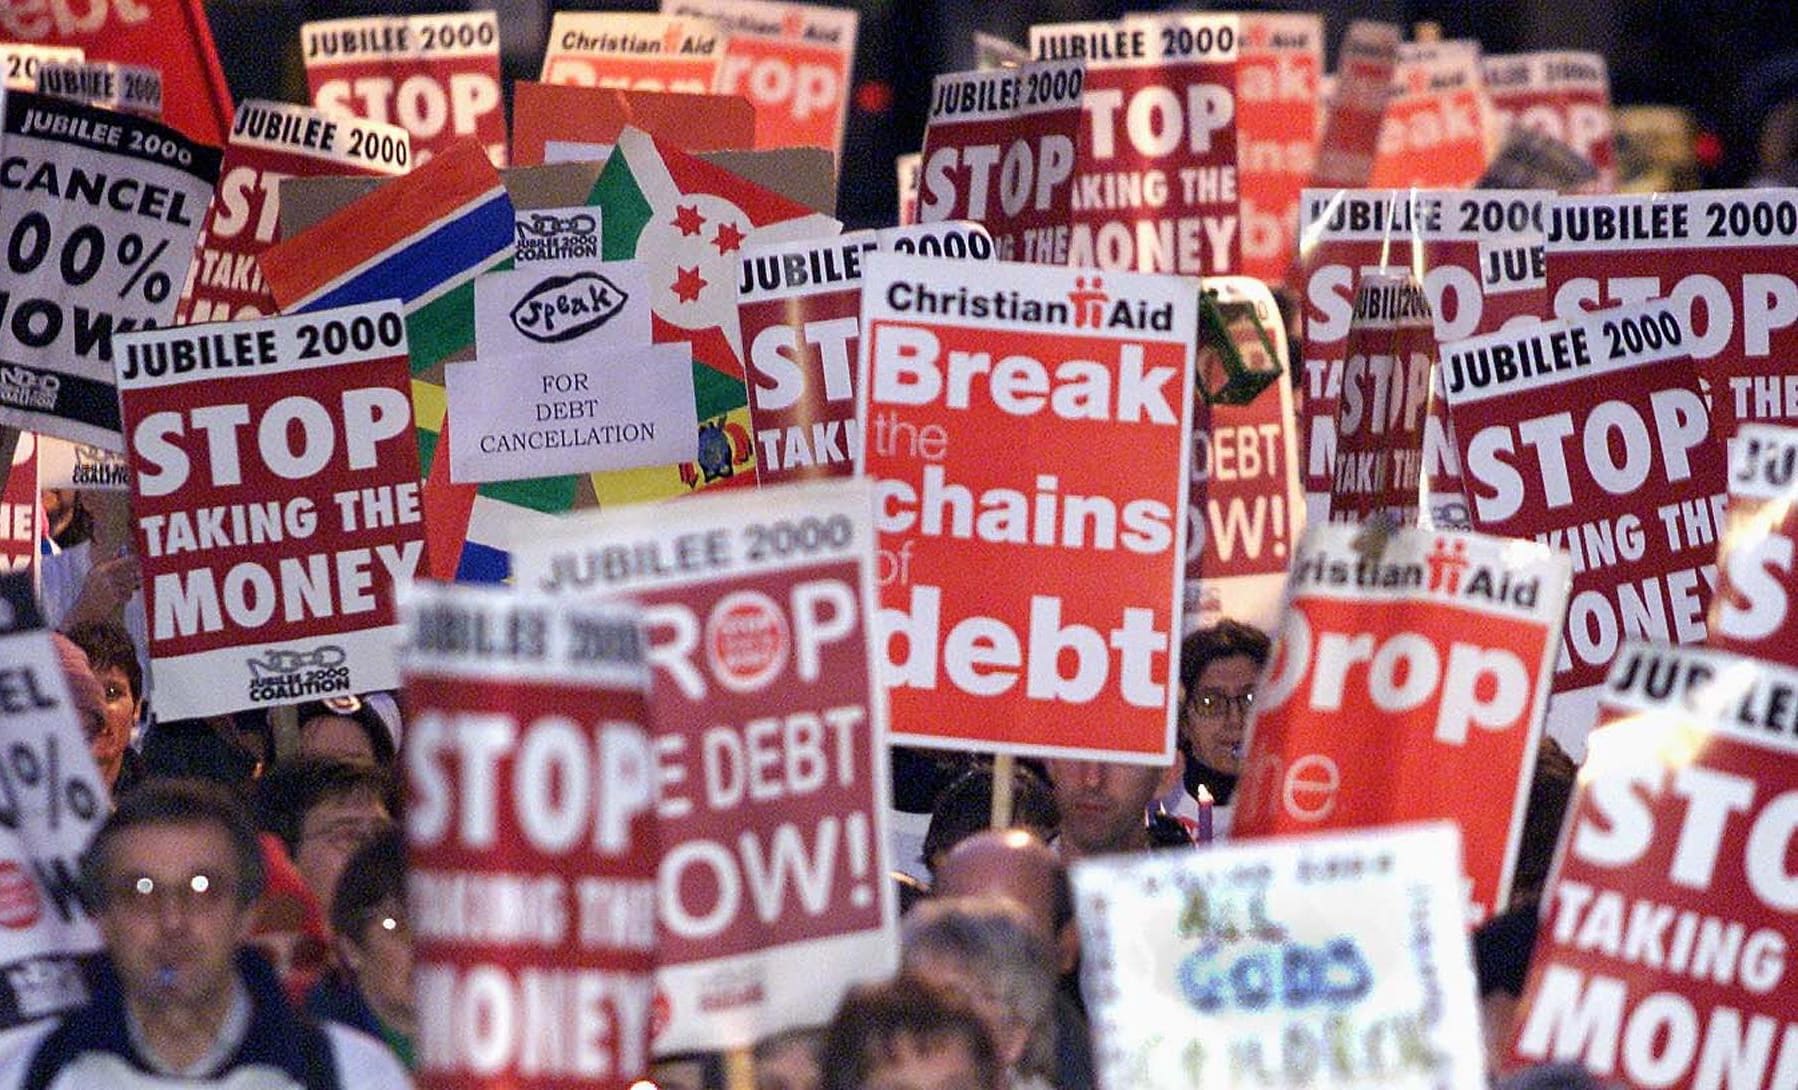 Banners are carried through the streets of London for the Jubilee 2000 March in aid of Western countries cancelling third world debt (London 2 December, 2000)